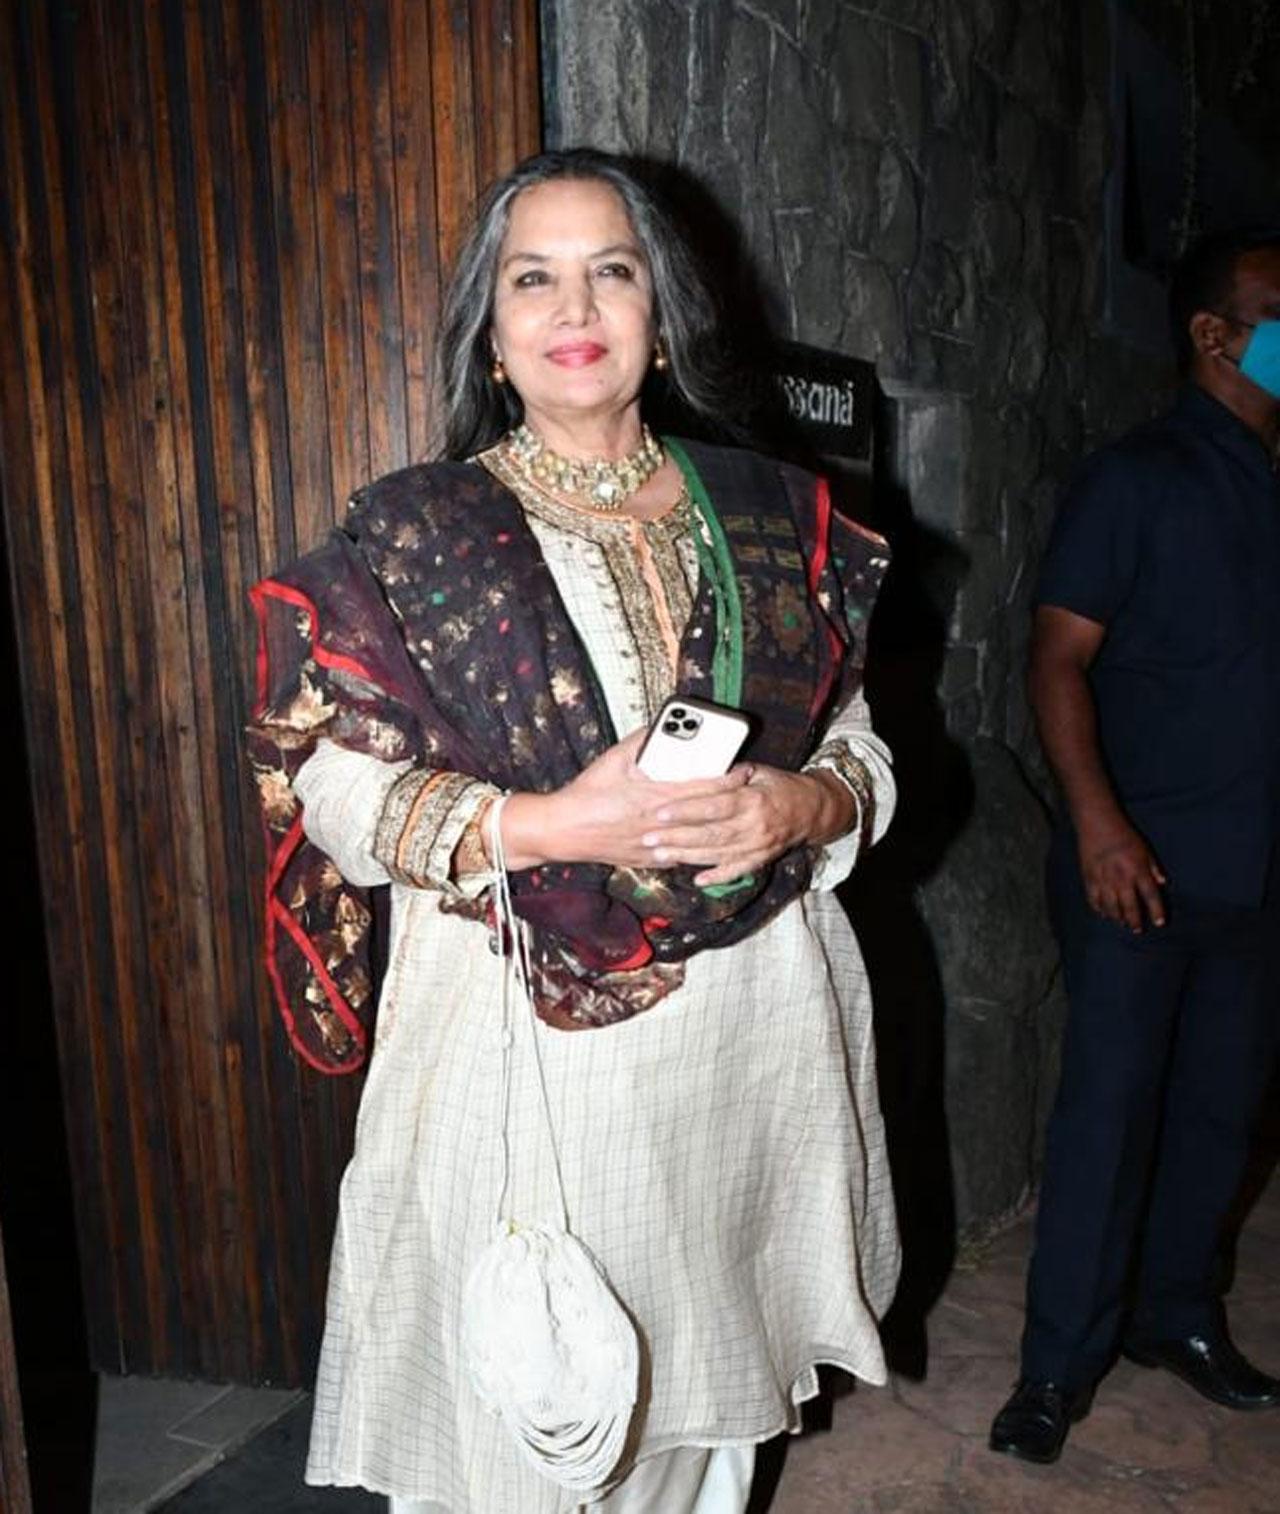 Mother of the groom, Shabana Azmi, also looked radiant as always. The intimate daytime wedding was attended by several celebrities including Hrithik Roshan, Rakesh Roshan, Rhea Chakraborty, Satish Shah and Ashutosh Gowariker.